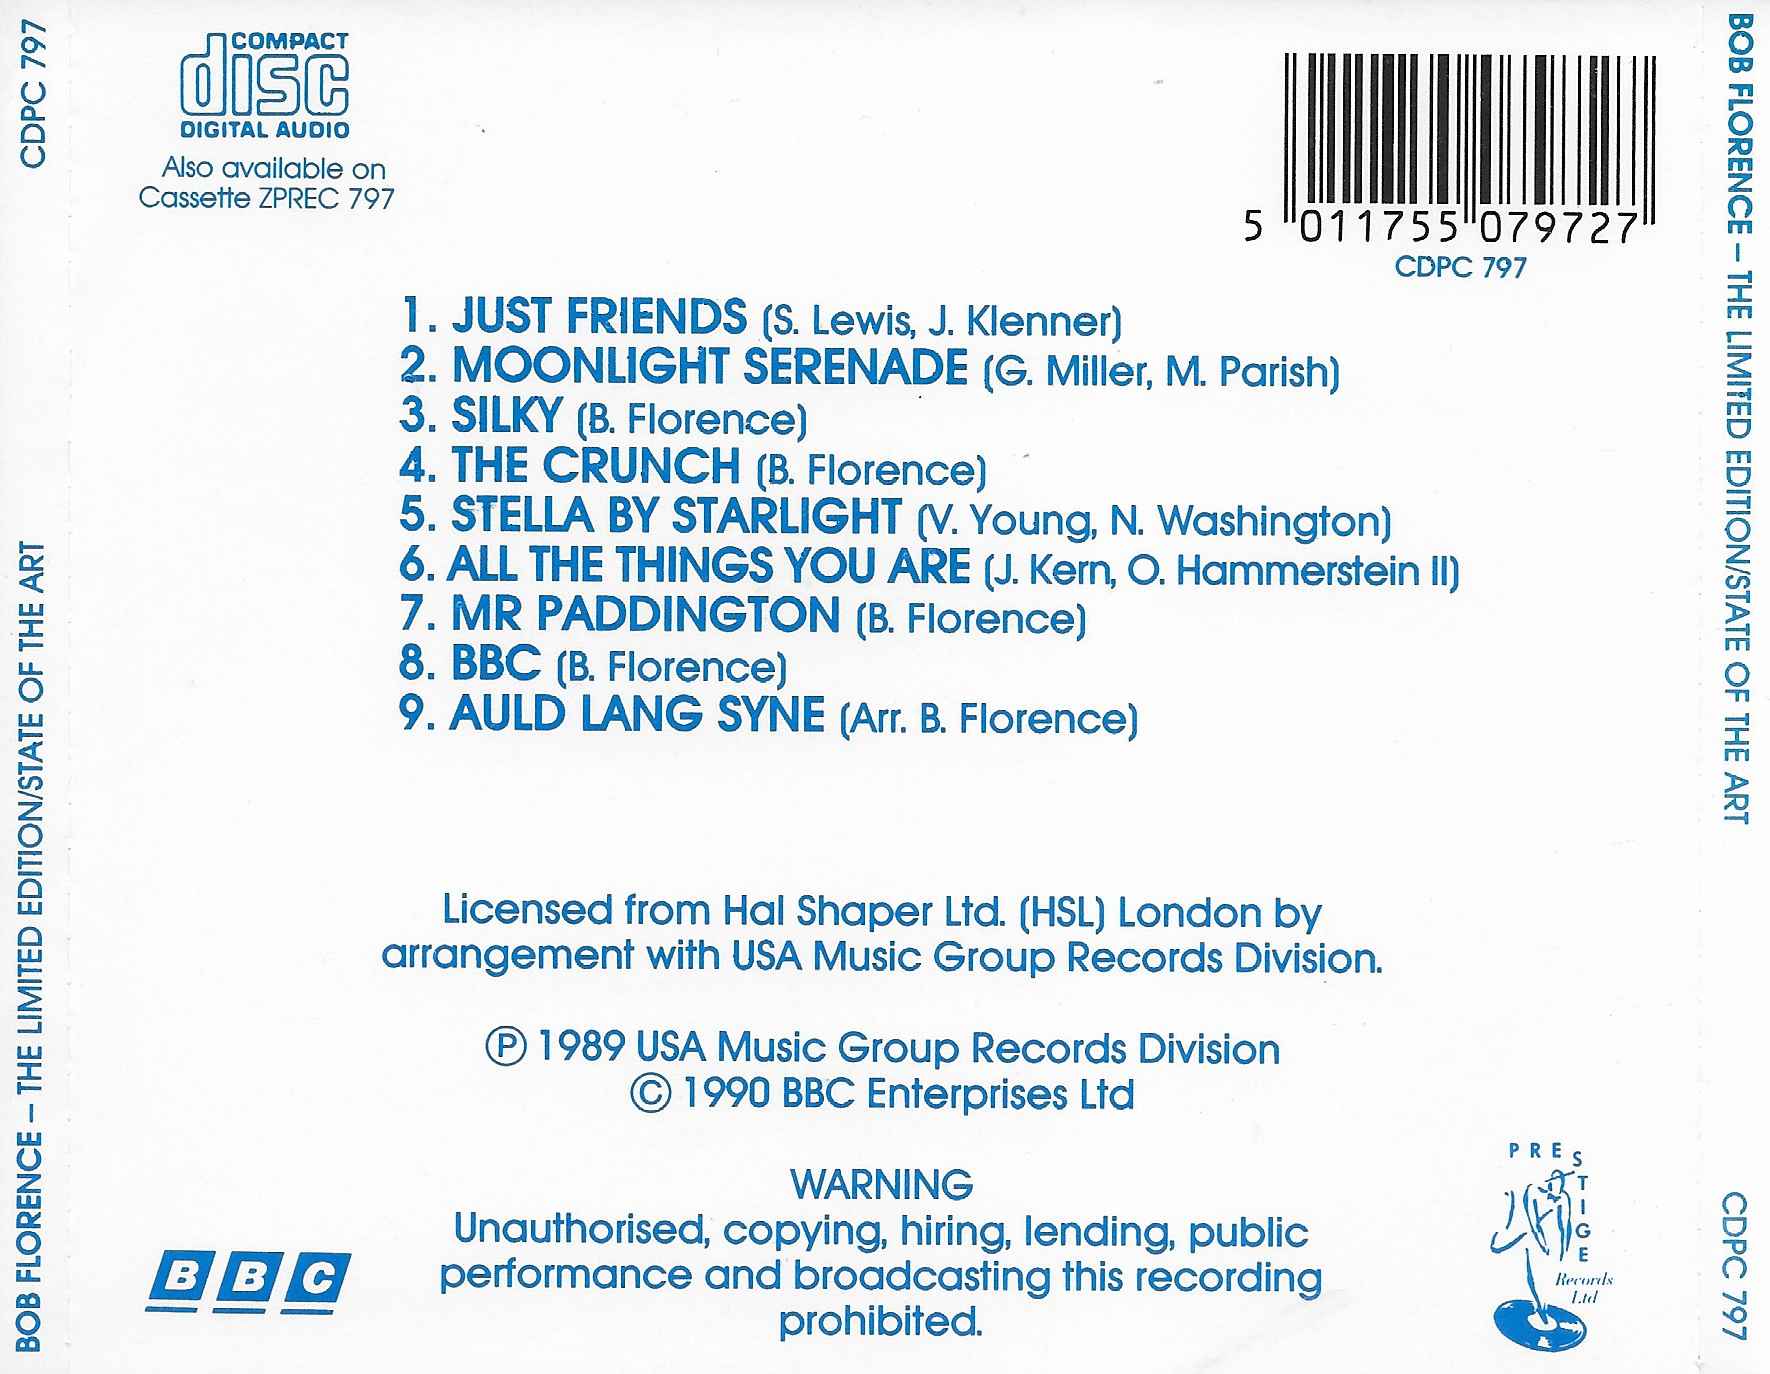 Back cover of CDPC 797